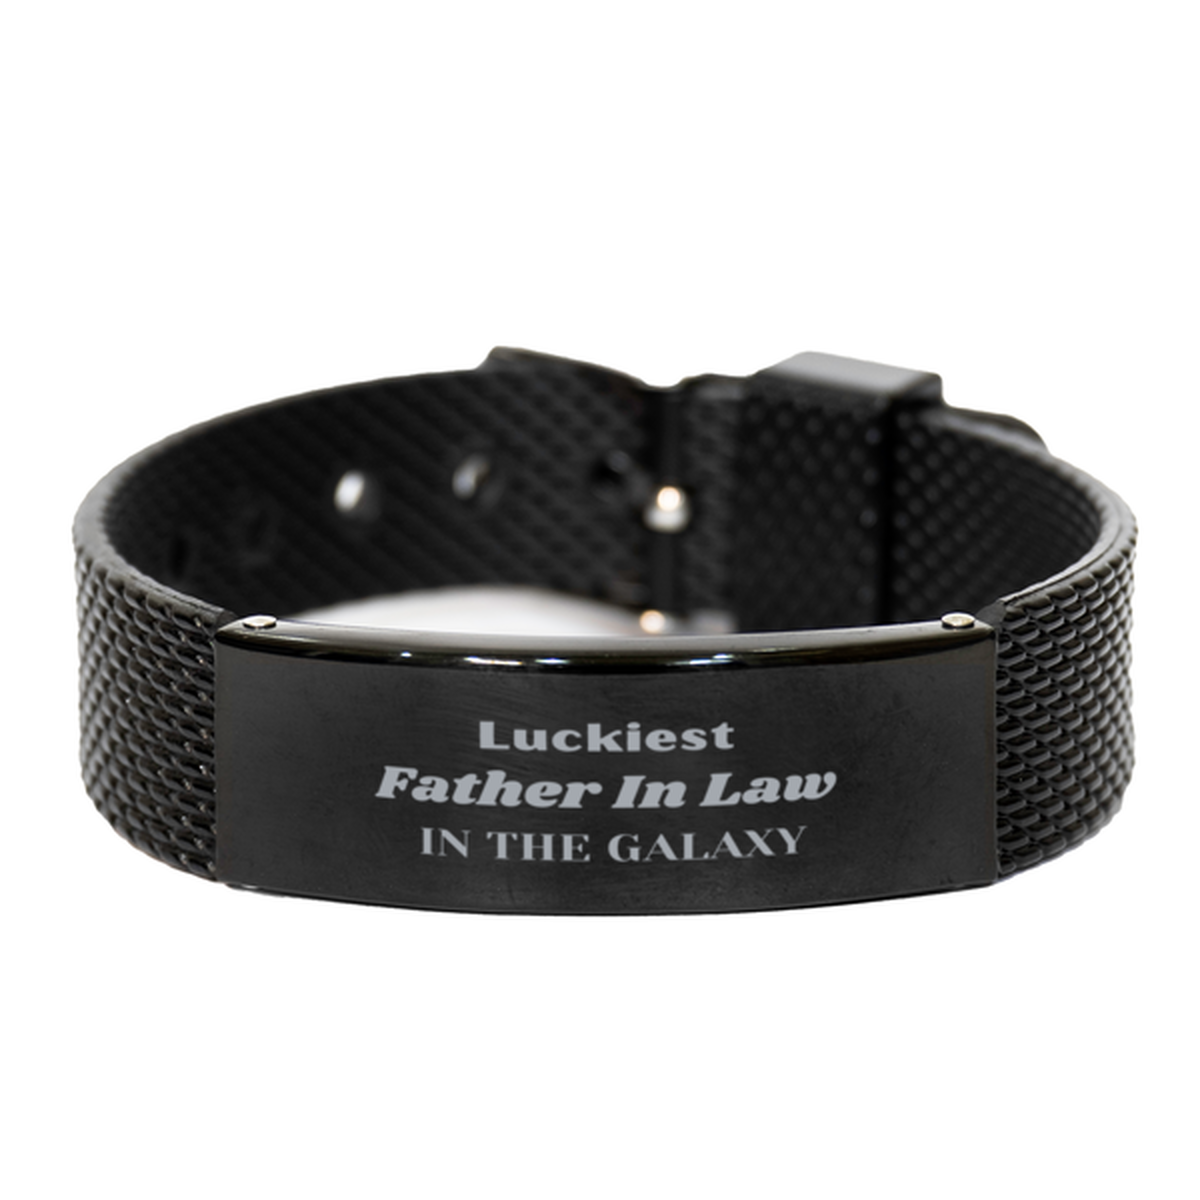 Luckiest Father In Law in the Galaxy, To My Father In Law Engraved Gifts, Christmas Father In Law Black Shark Mesh Bracelet Gifts, X-mas Birthday Unique Gifts For Father In Law Men Women